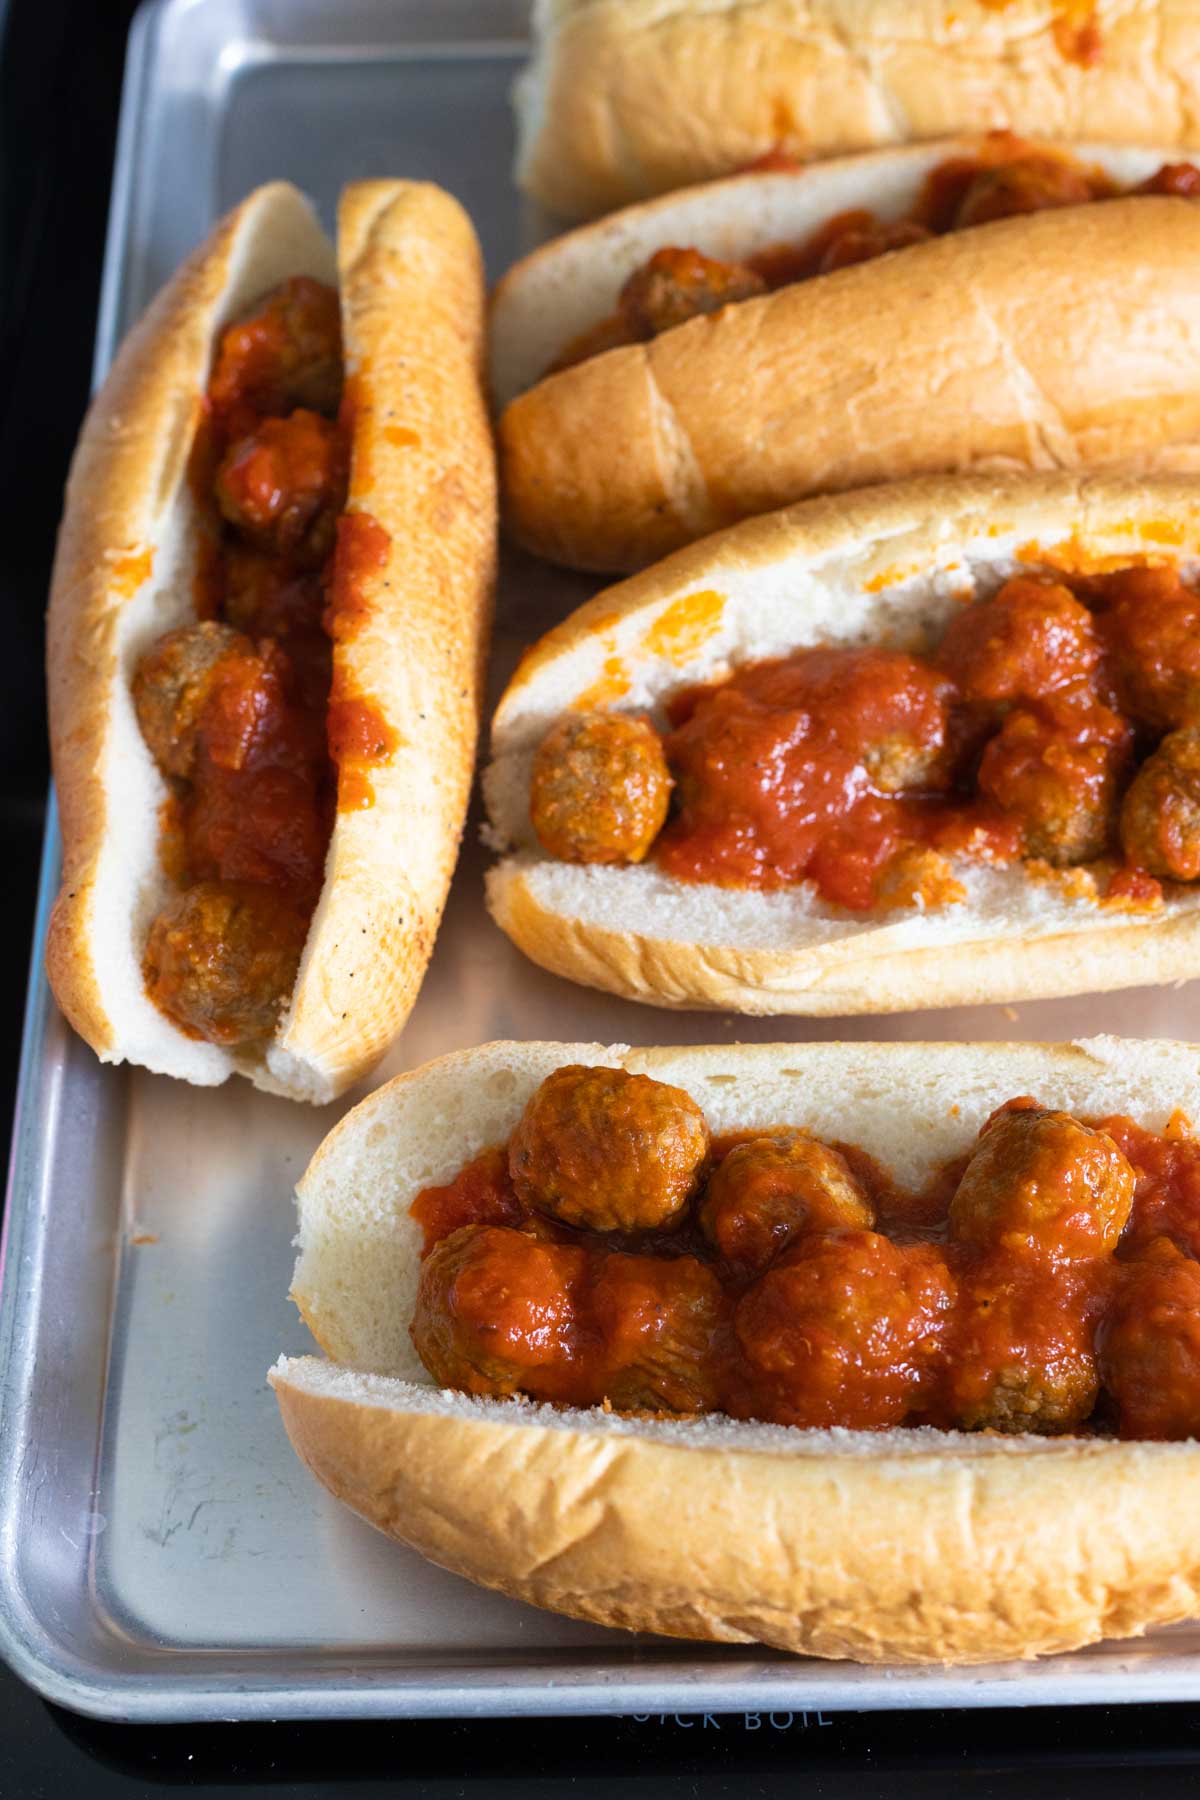 The meatball subs have been filled.